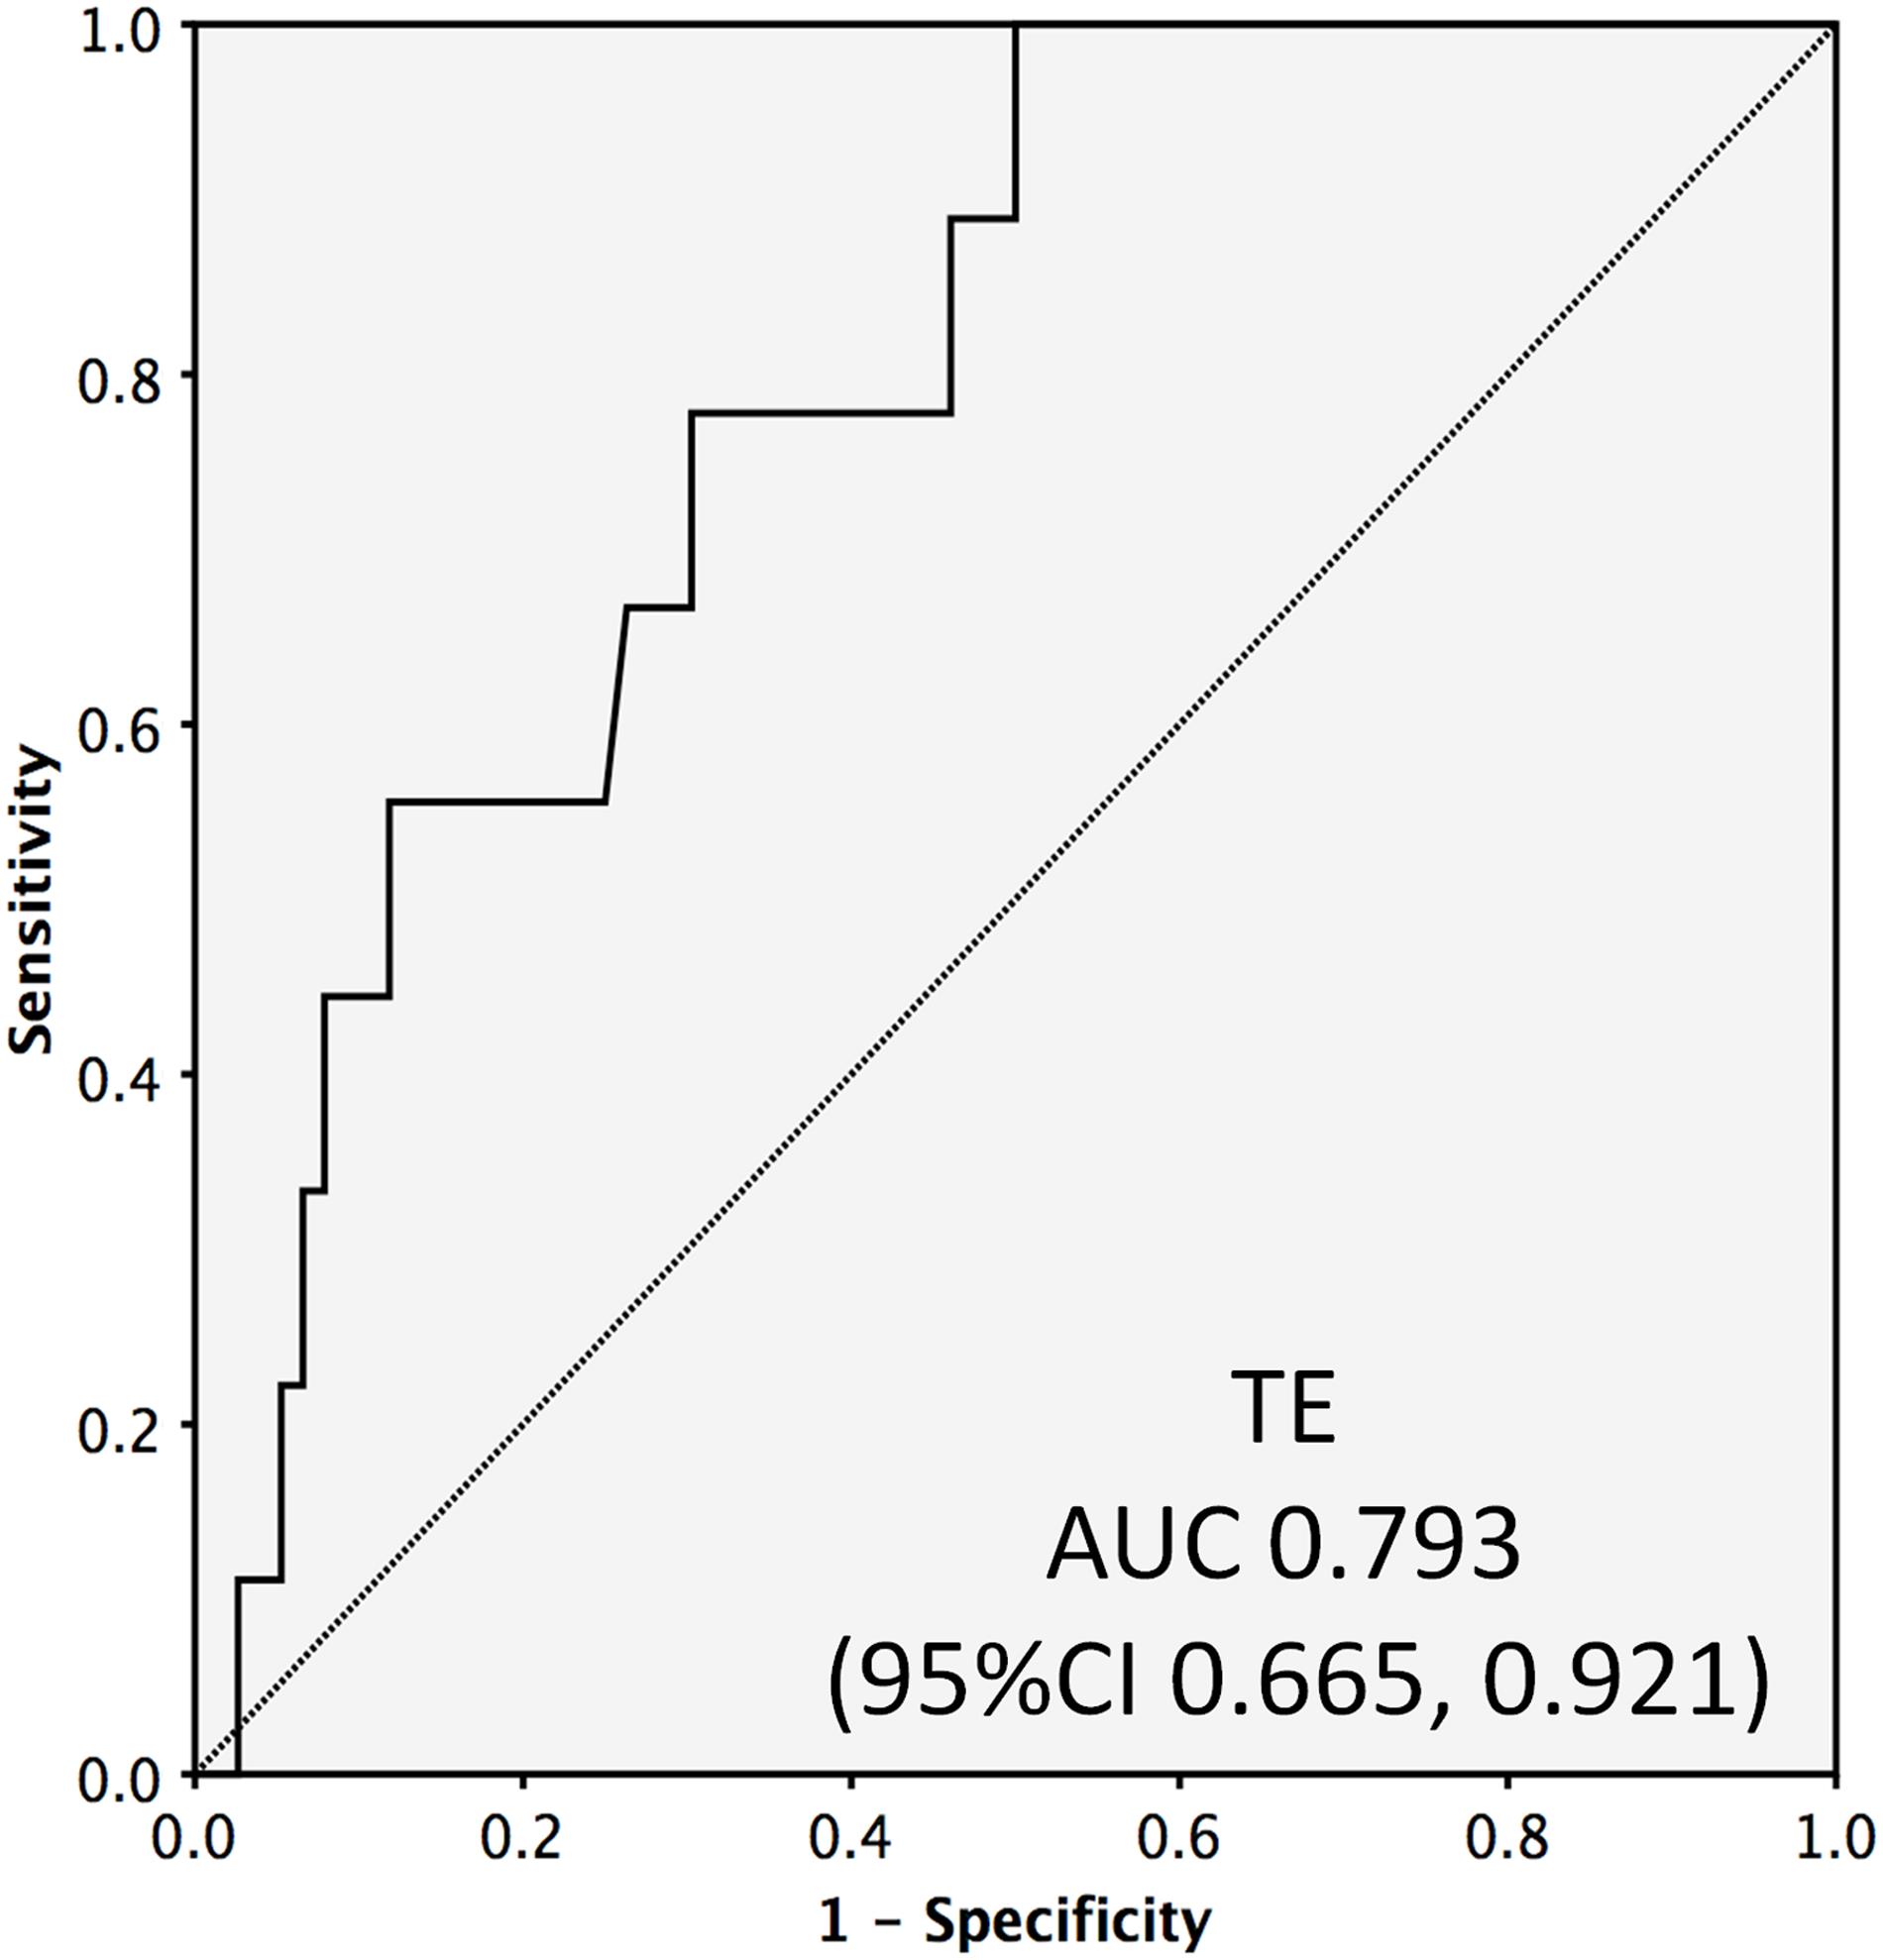 Receiver operating characteristic curve for TE for detecting significant fibrosis.